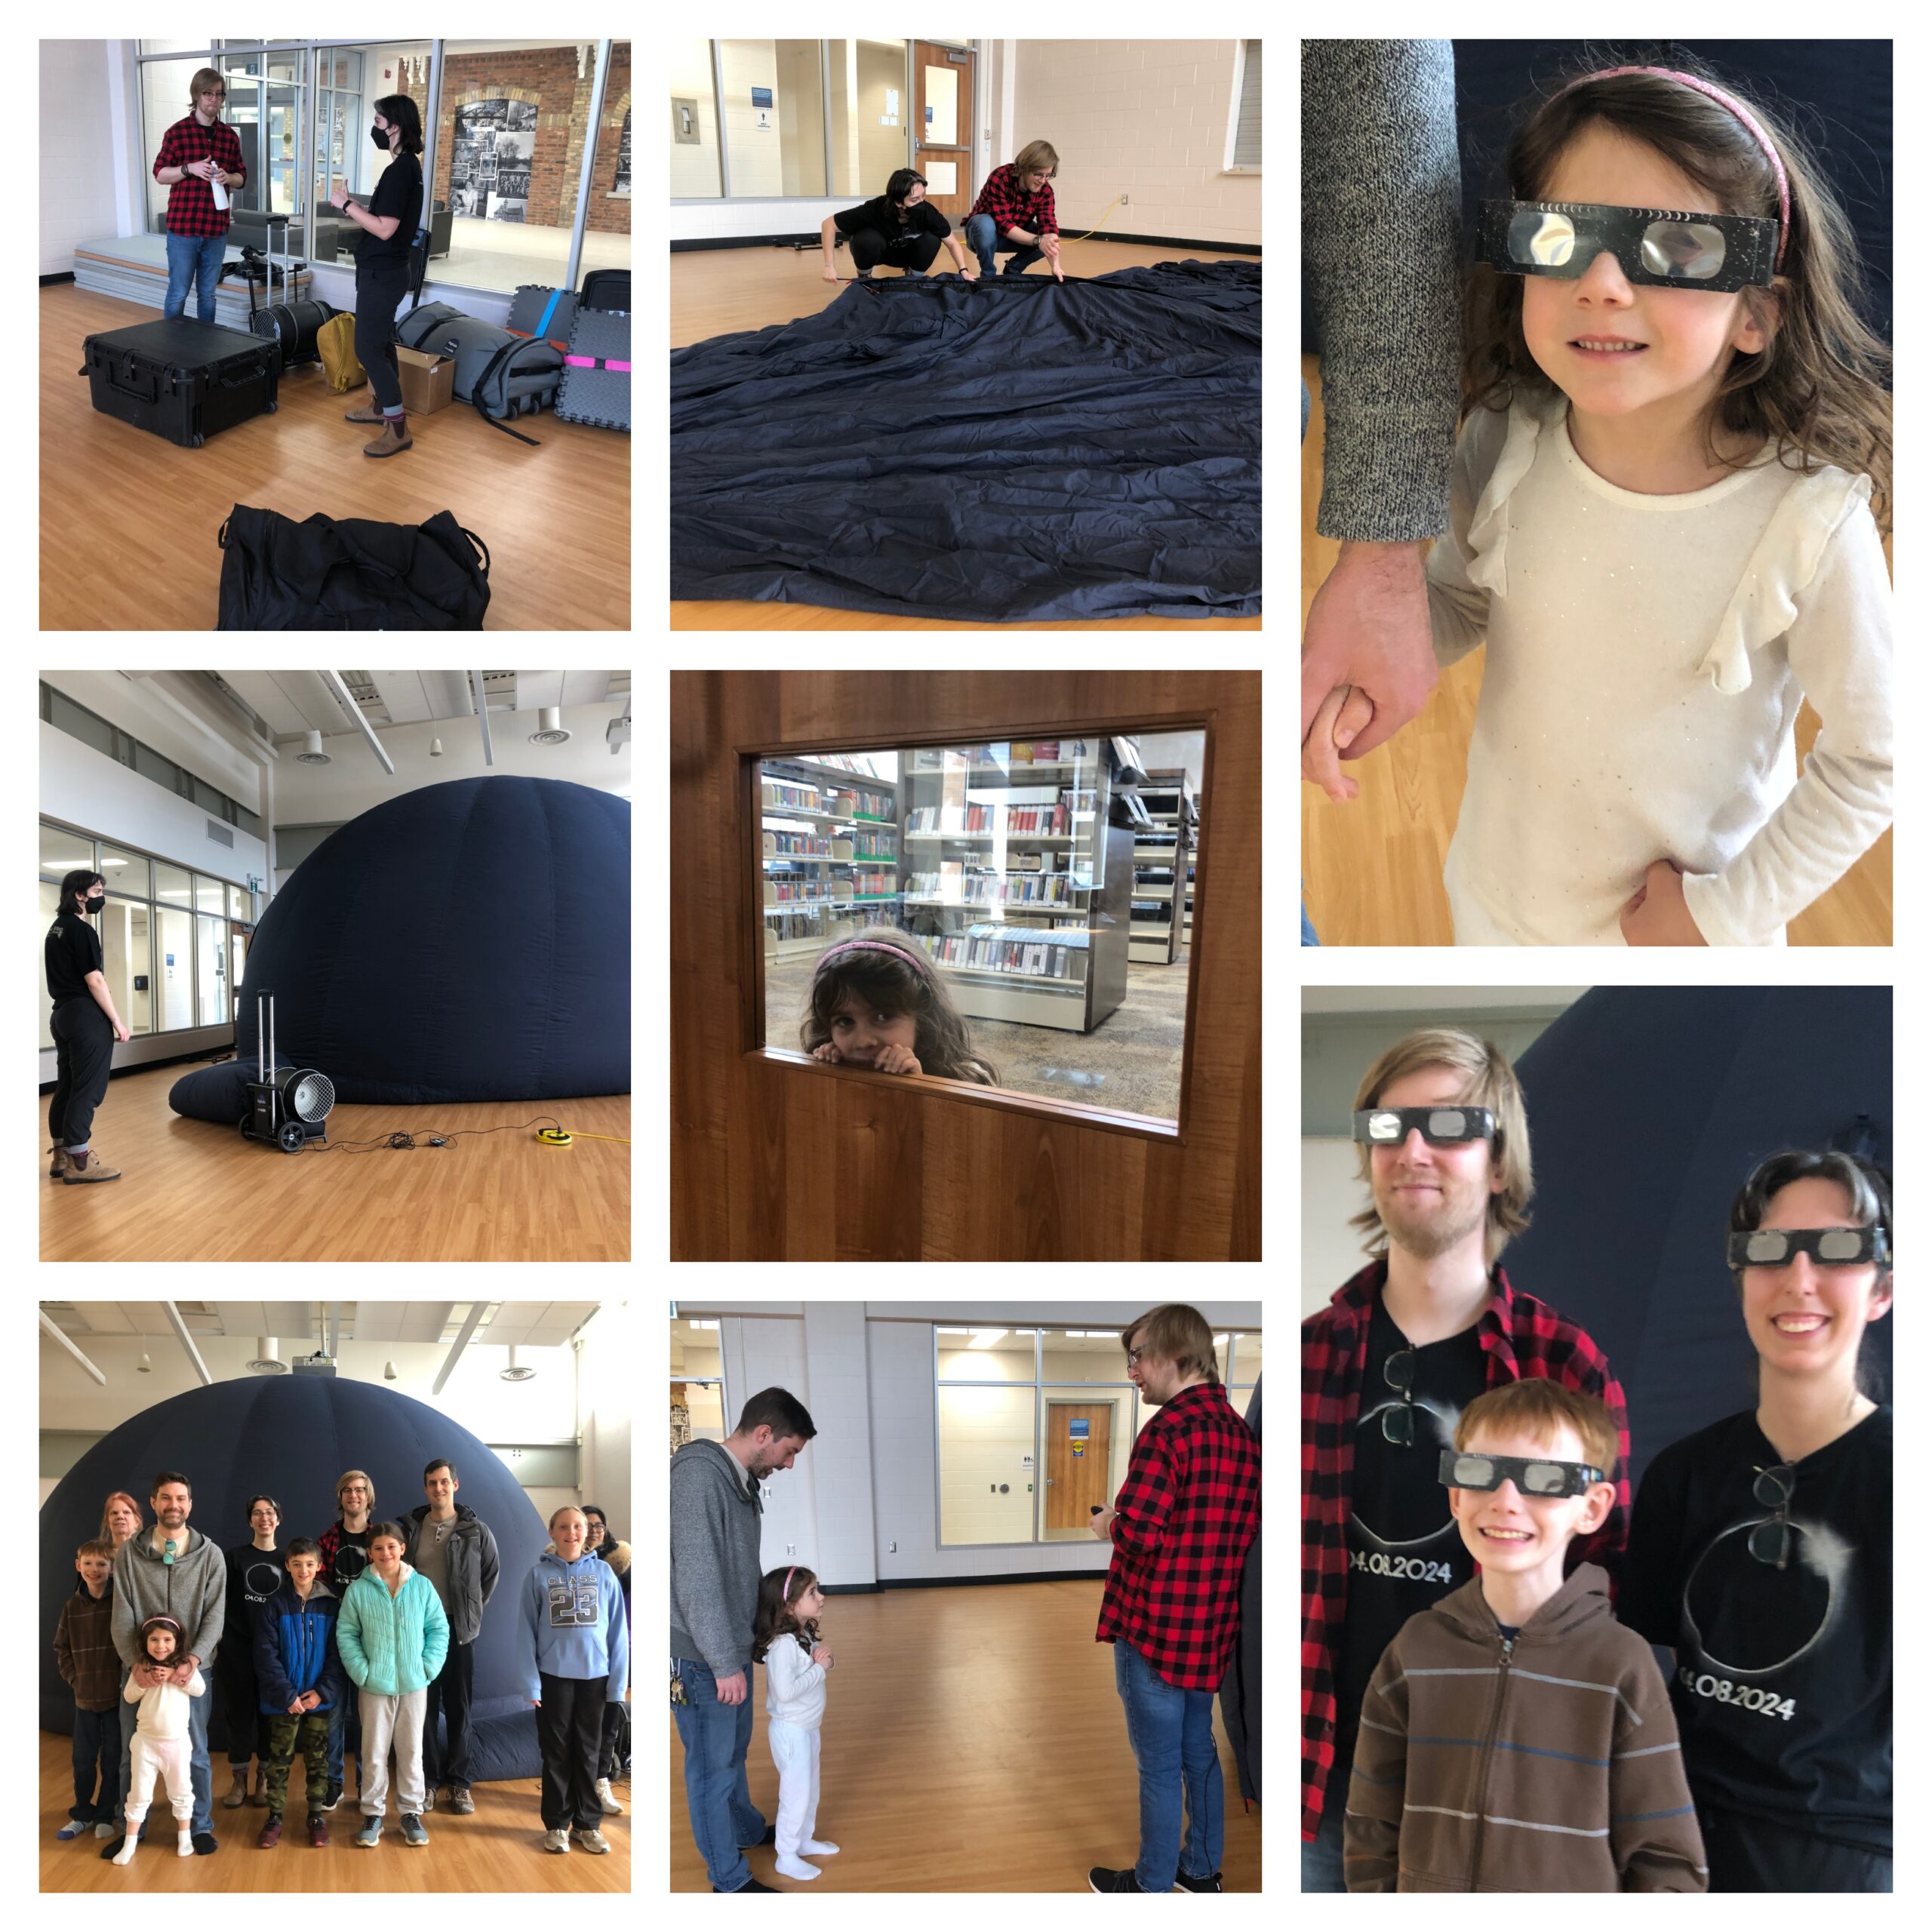 Collage of photos from planetarium show